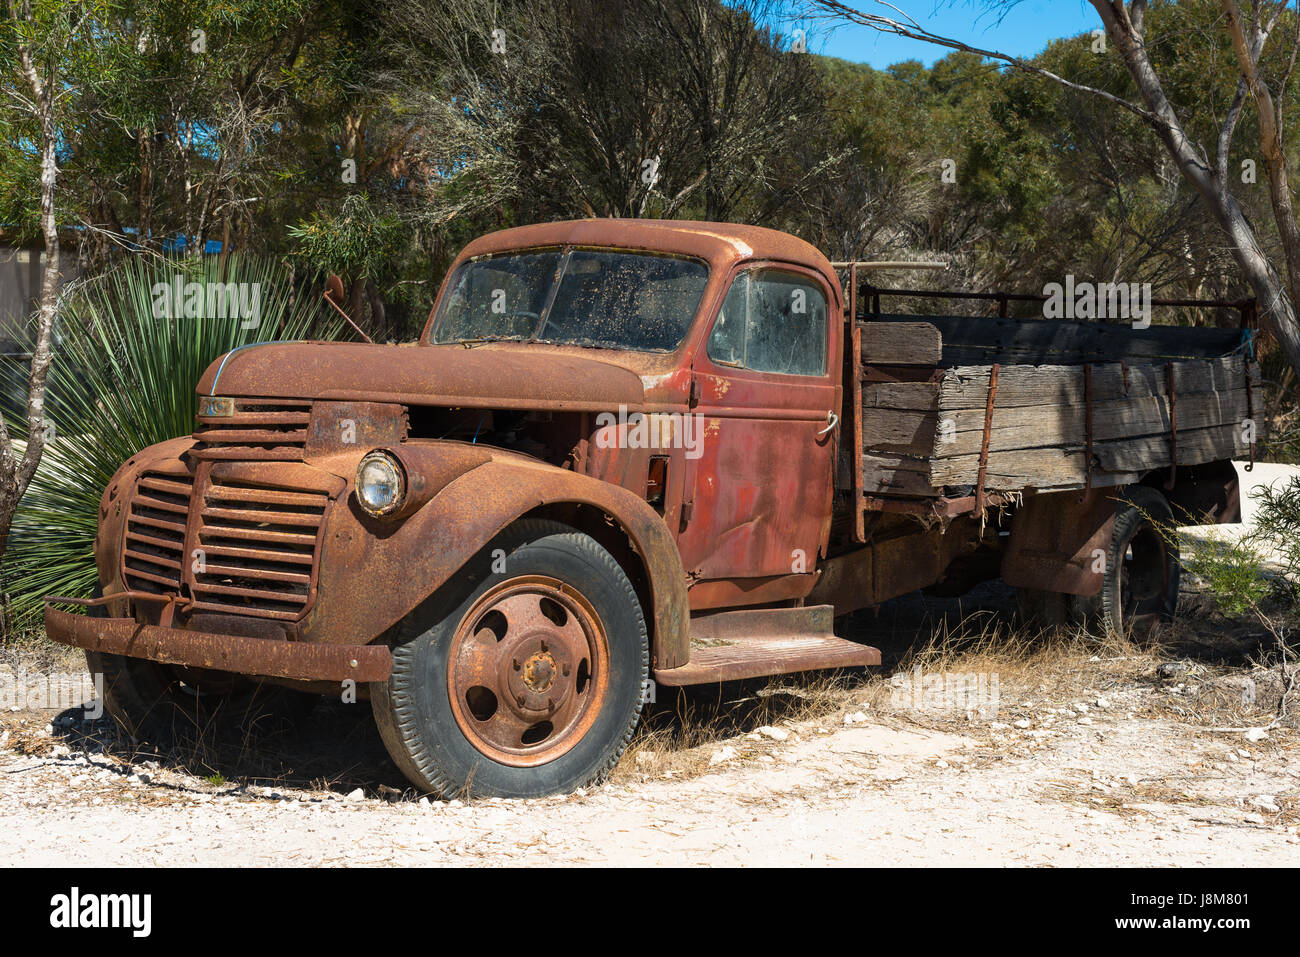 Rusty old truck in outback Australia. Northern Territory Stock Photo: 143045505 - Alamy